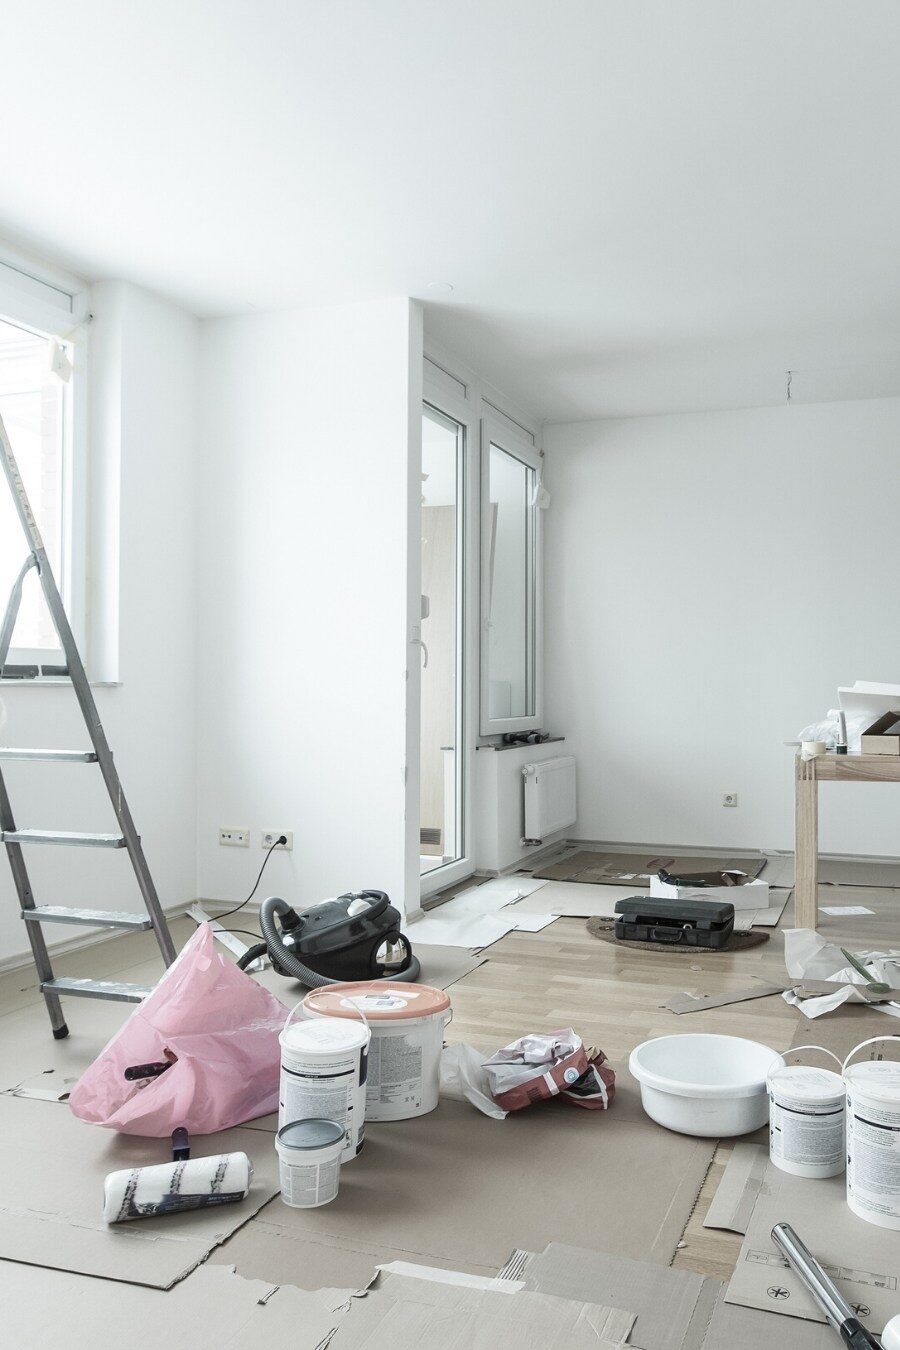 Important Things To Take Care Of When Renovating Your Home